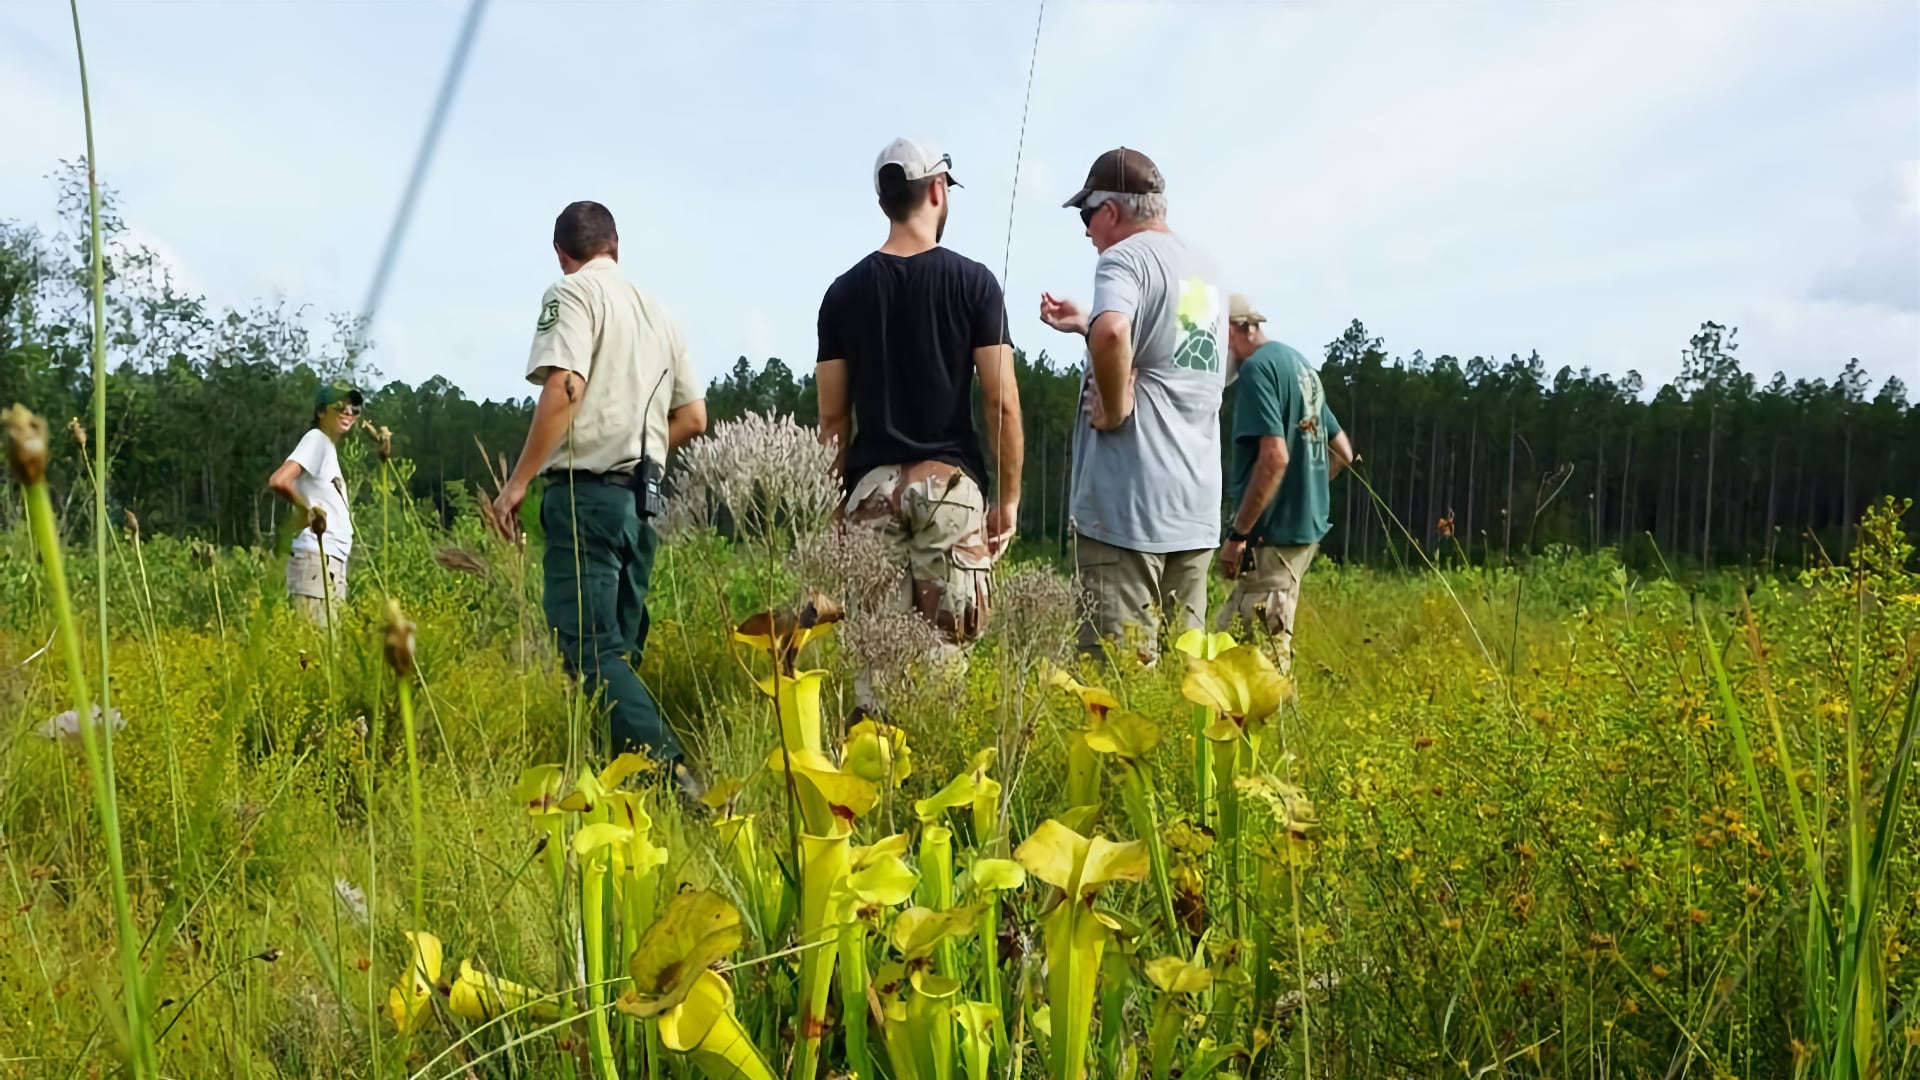 The NASA DEVELOP team joined their partners for a day of data collection in Conecuh National Forest. Image credit: NASA DEVELOP